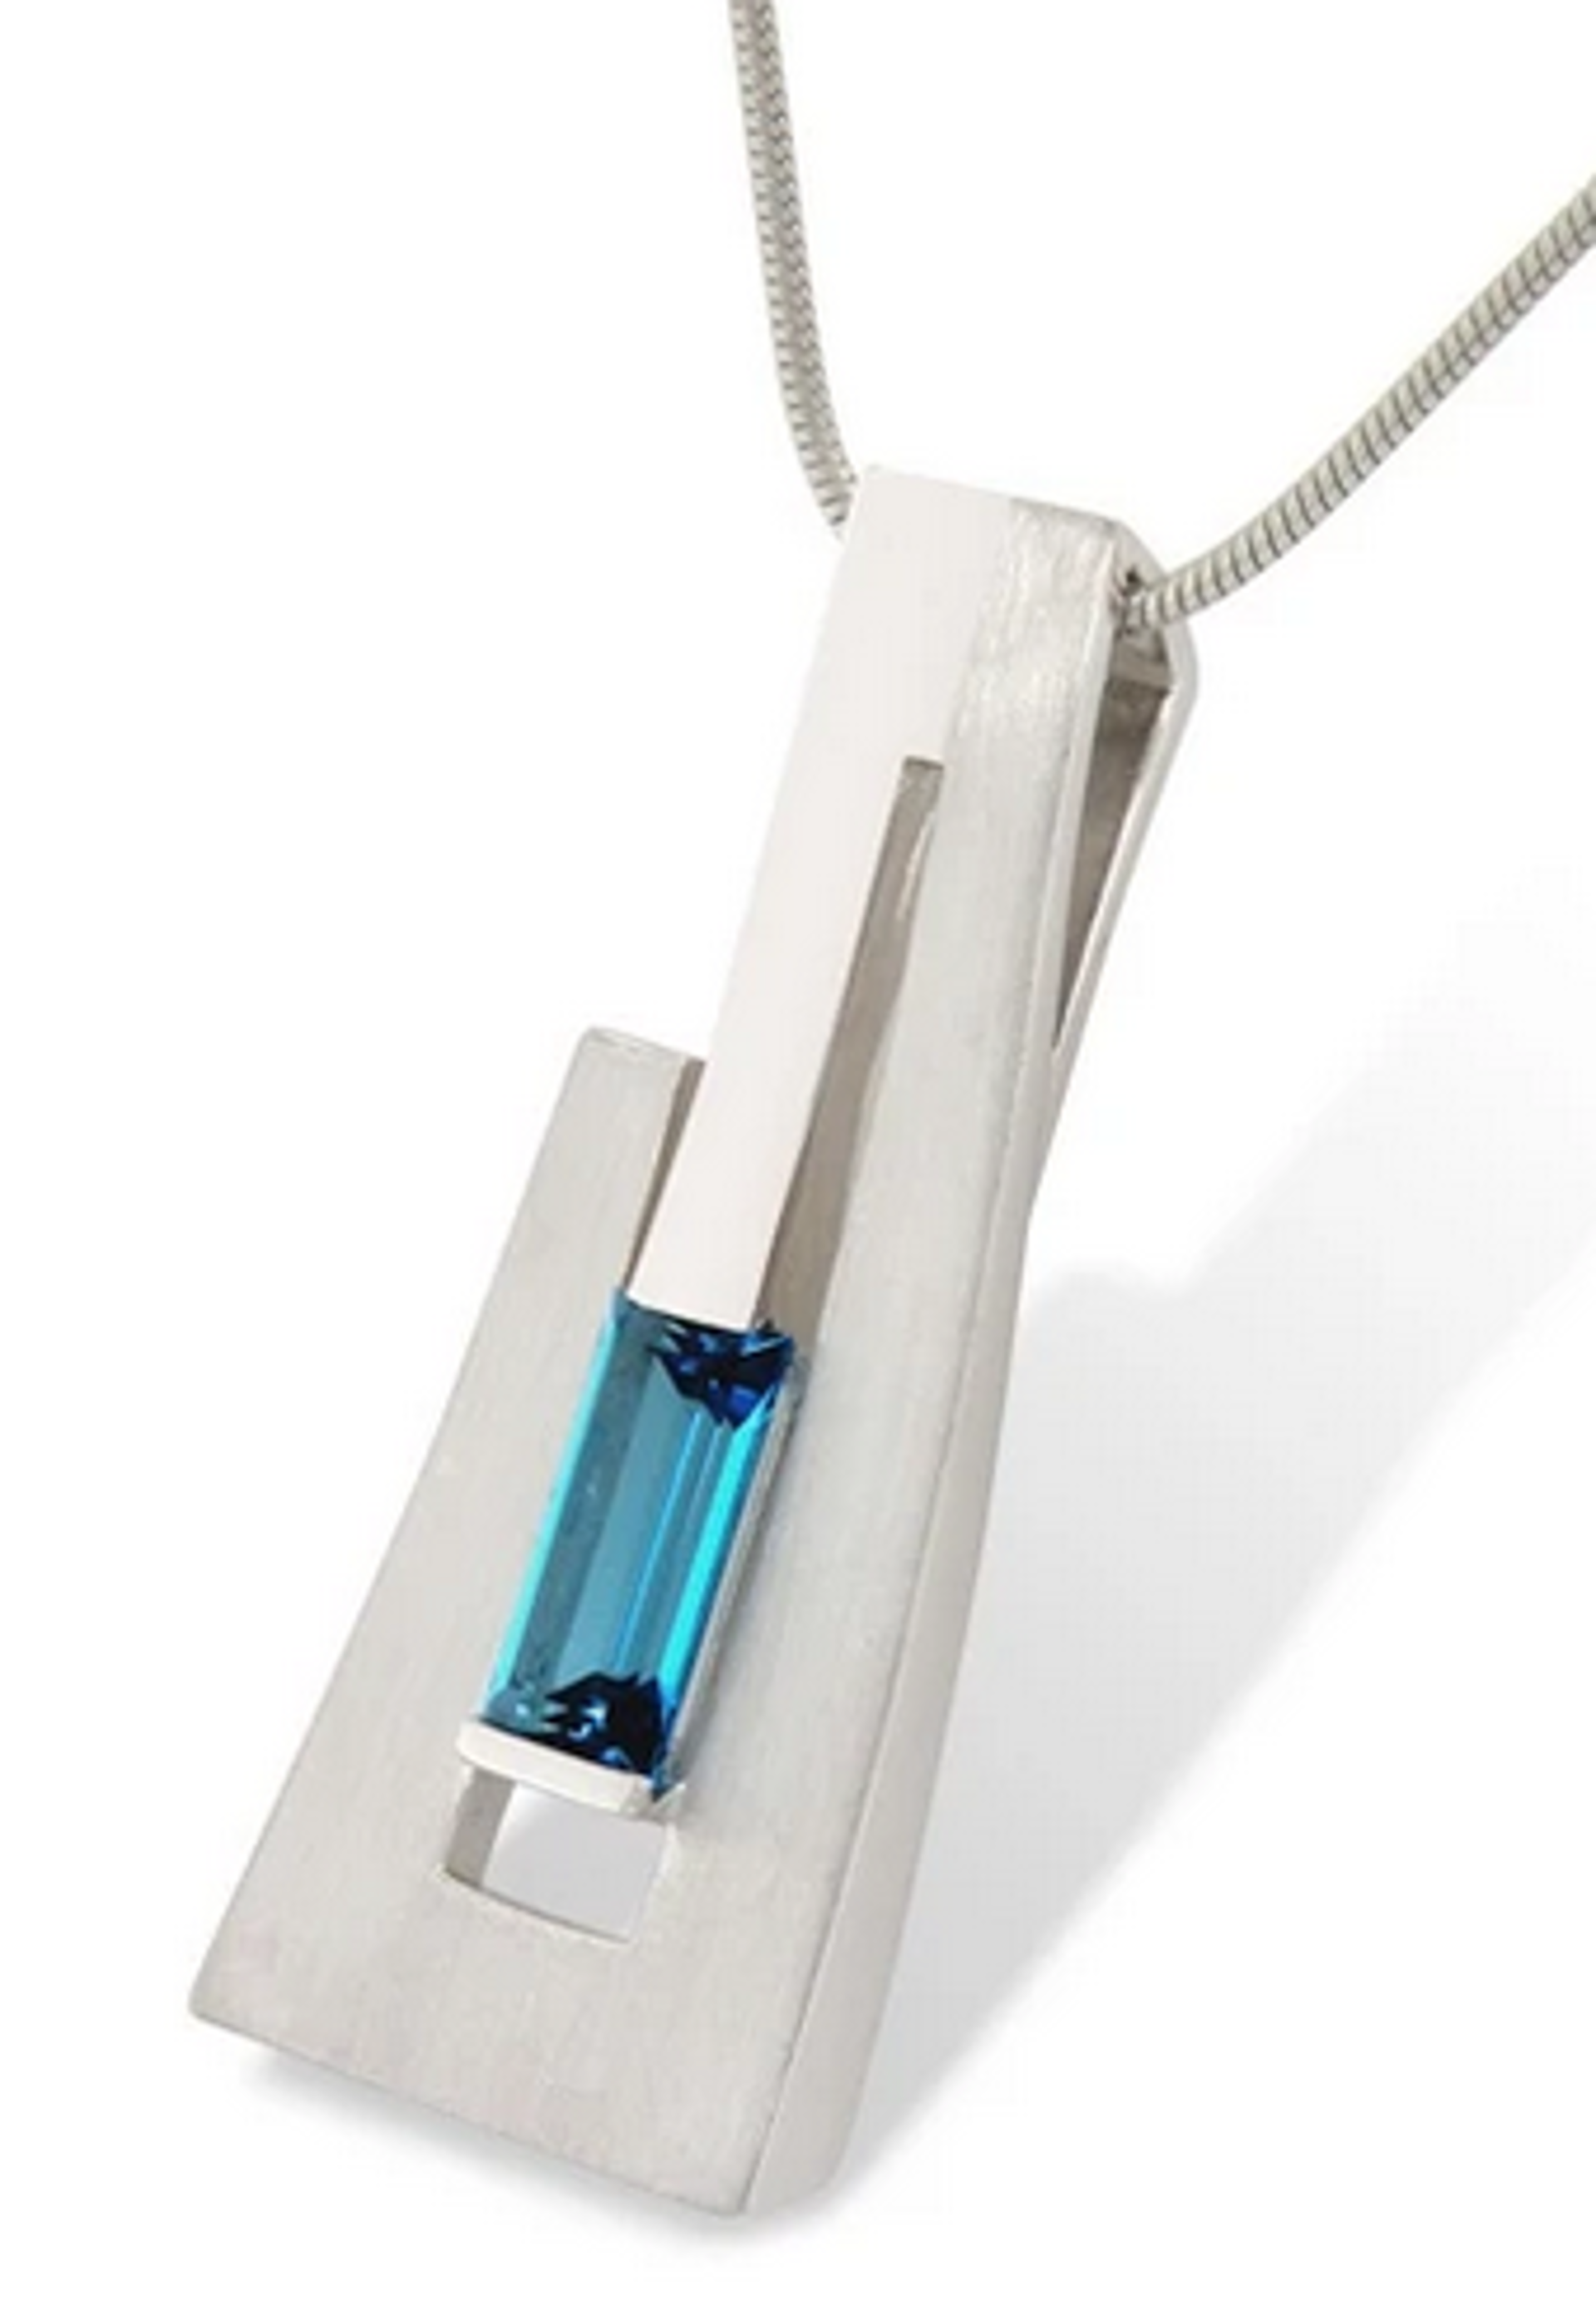 Pendant - Emerald Cut London Blue Topaz With Brushed Sterling Silver  P7313LBT by Joryel Vera